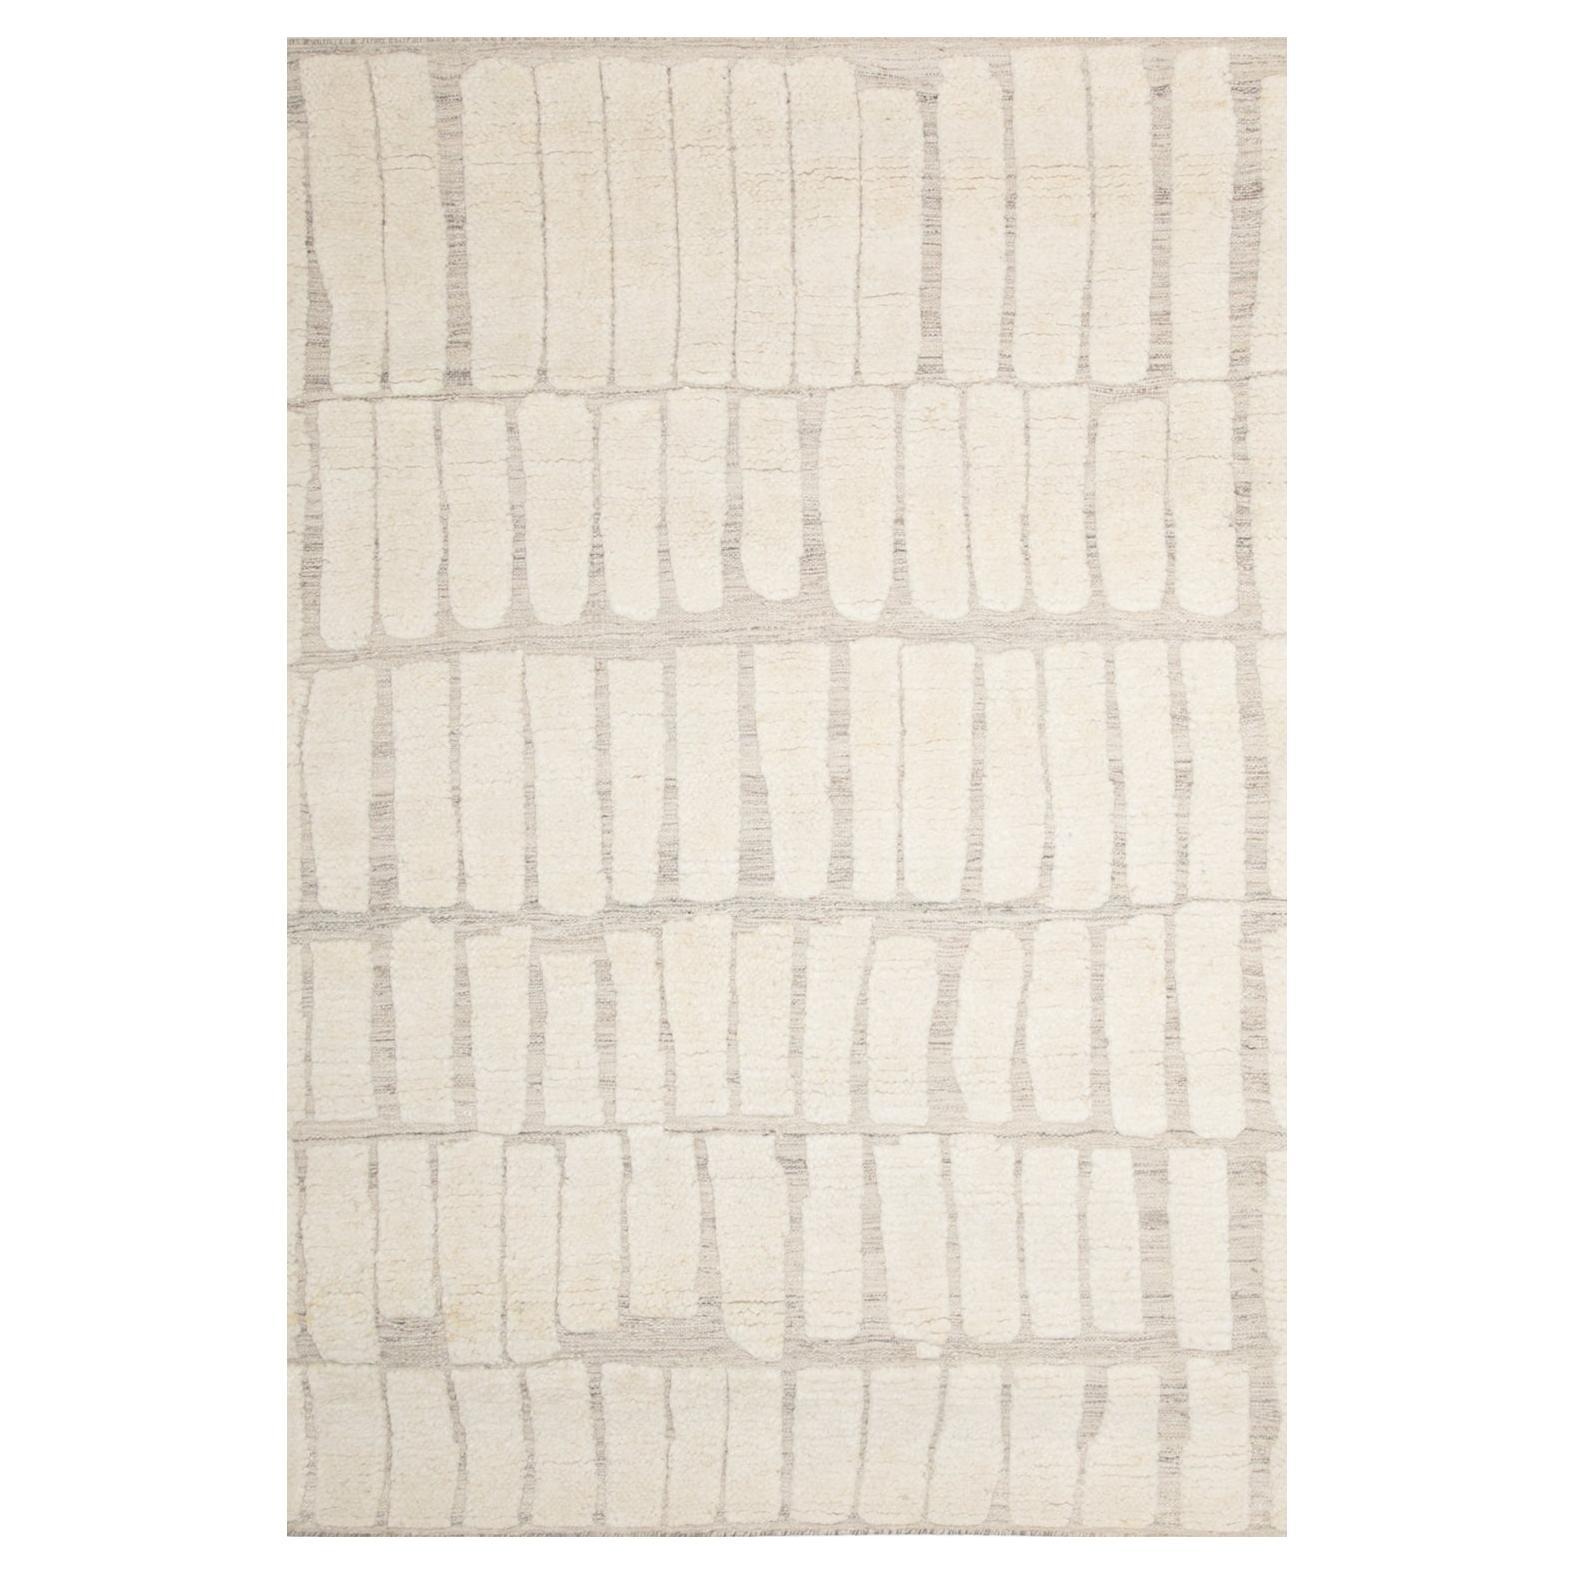 Modern Handknotted 100% Wool Rug High Pile Textures White&Greige Nzuri For Sale